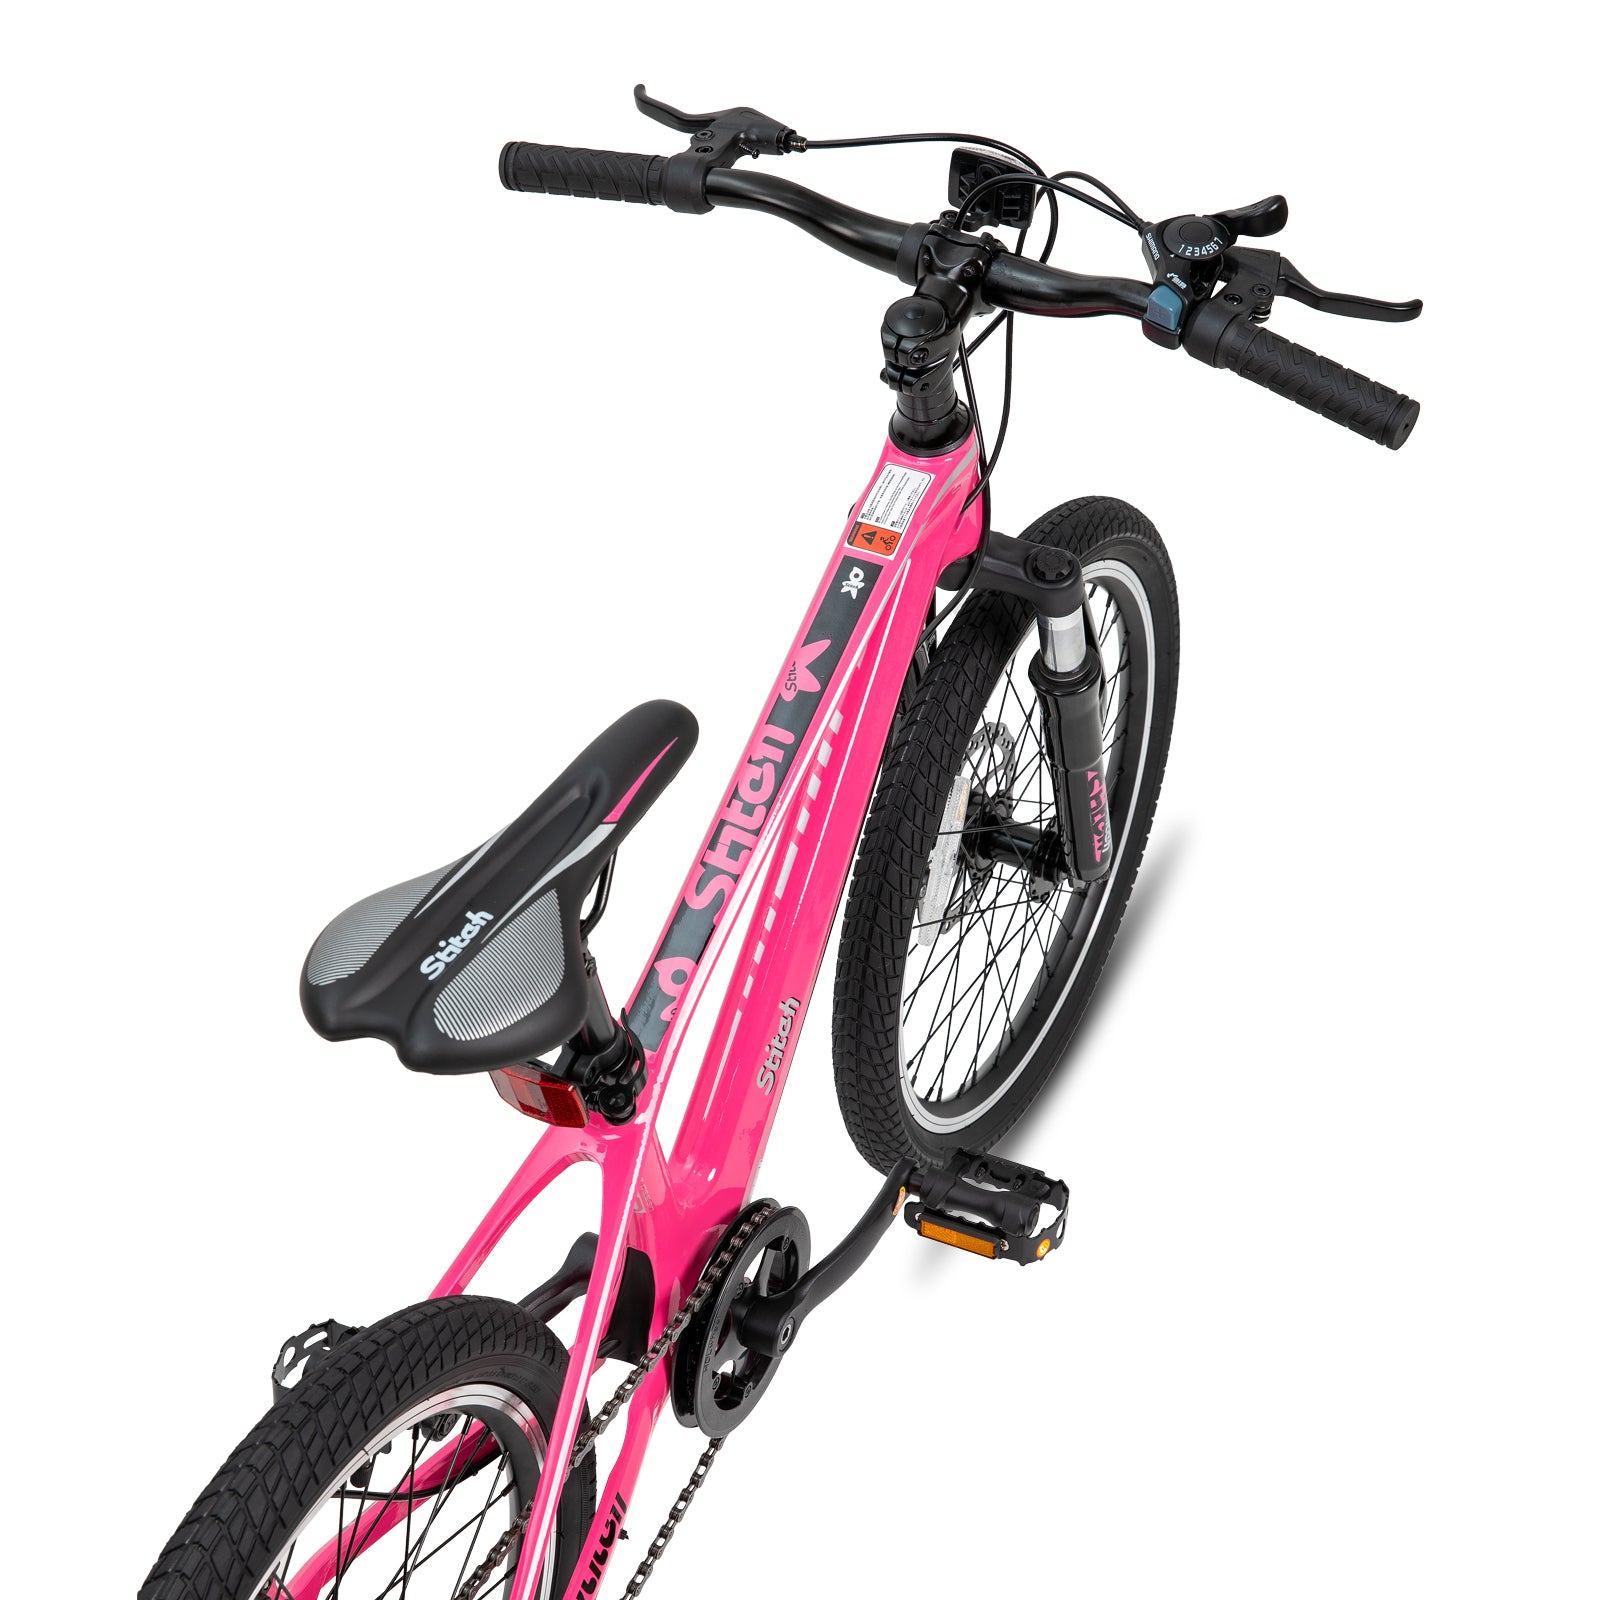 JOYSTAR 20 Inch Magnesium Alloy Kids Mountain Bicycle with Shimano 7-Speed & Dual Disc Brake